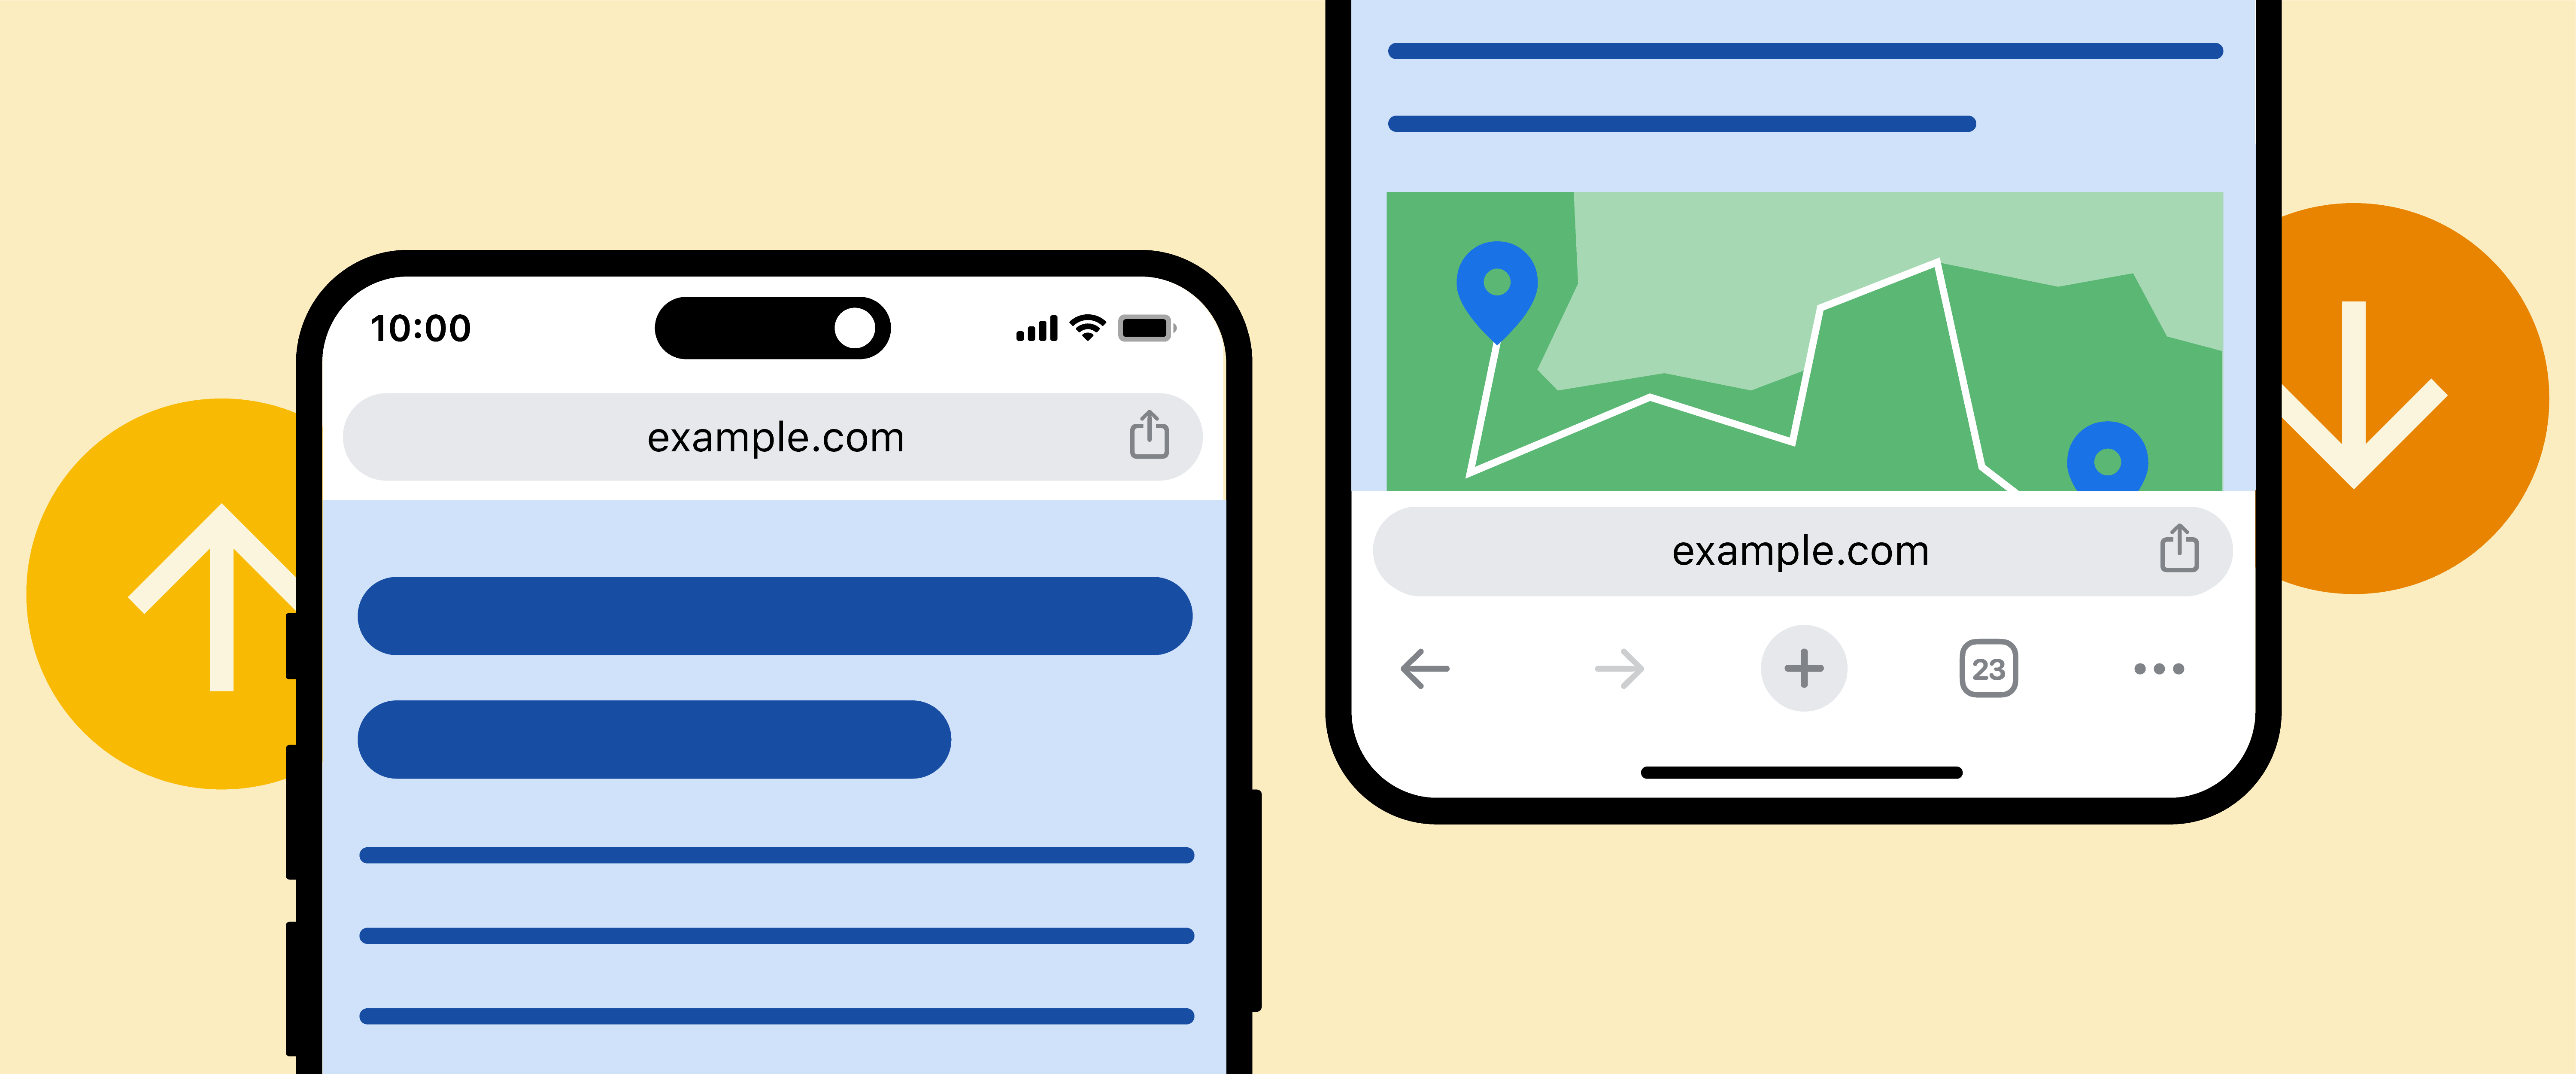 How to use mobile search effectively?